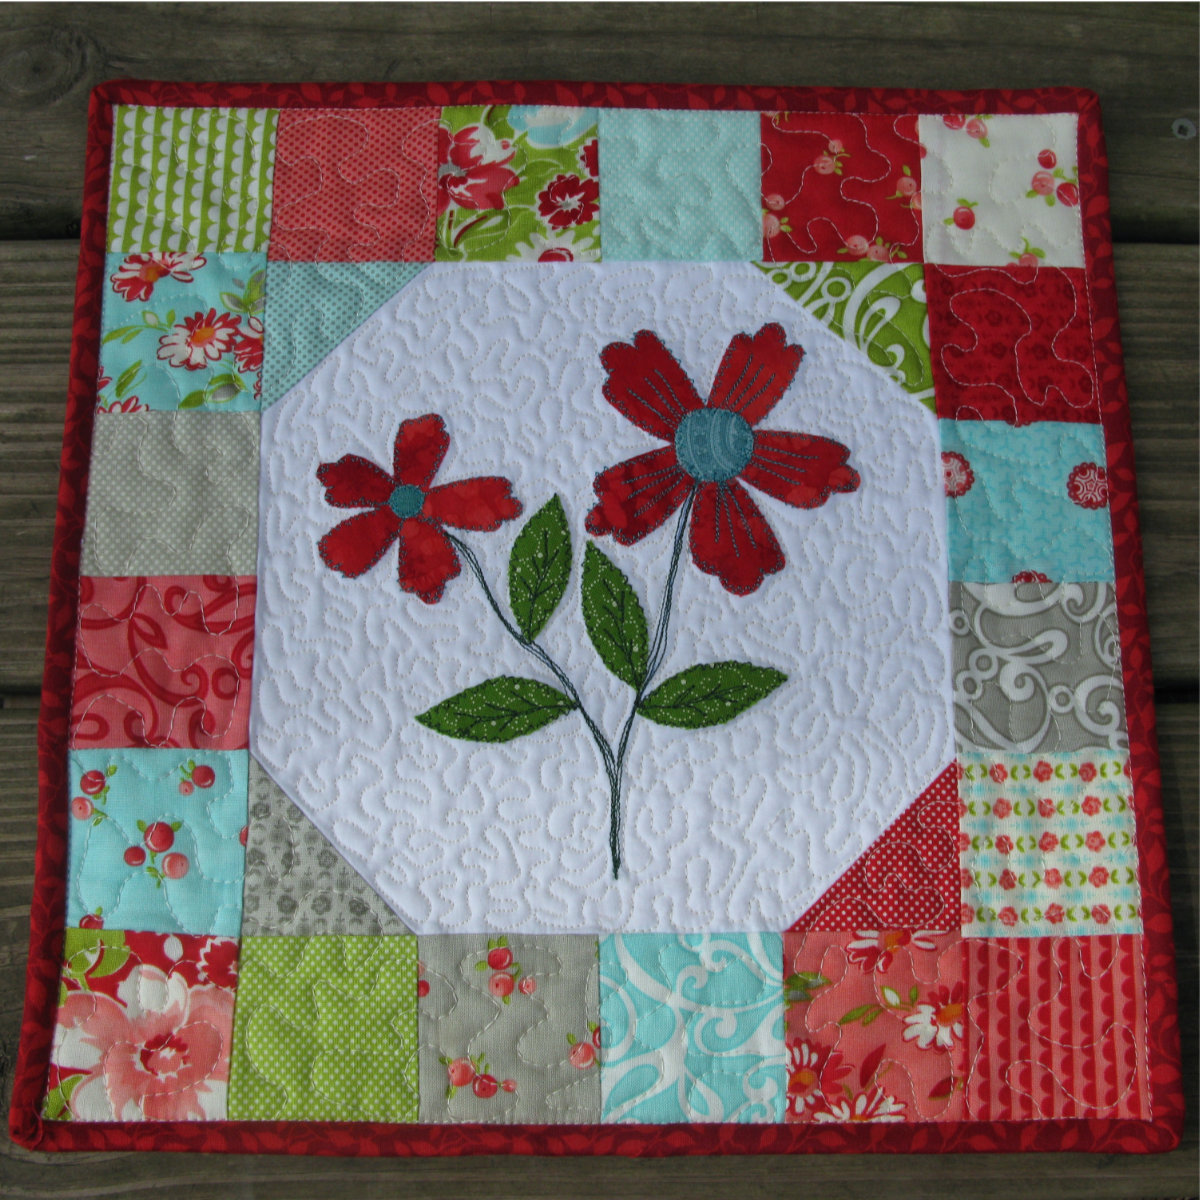 Finished mini floral quilt